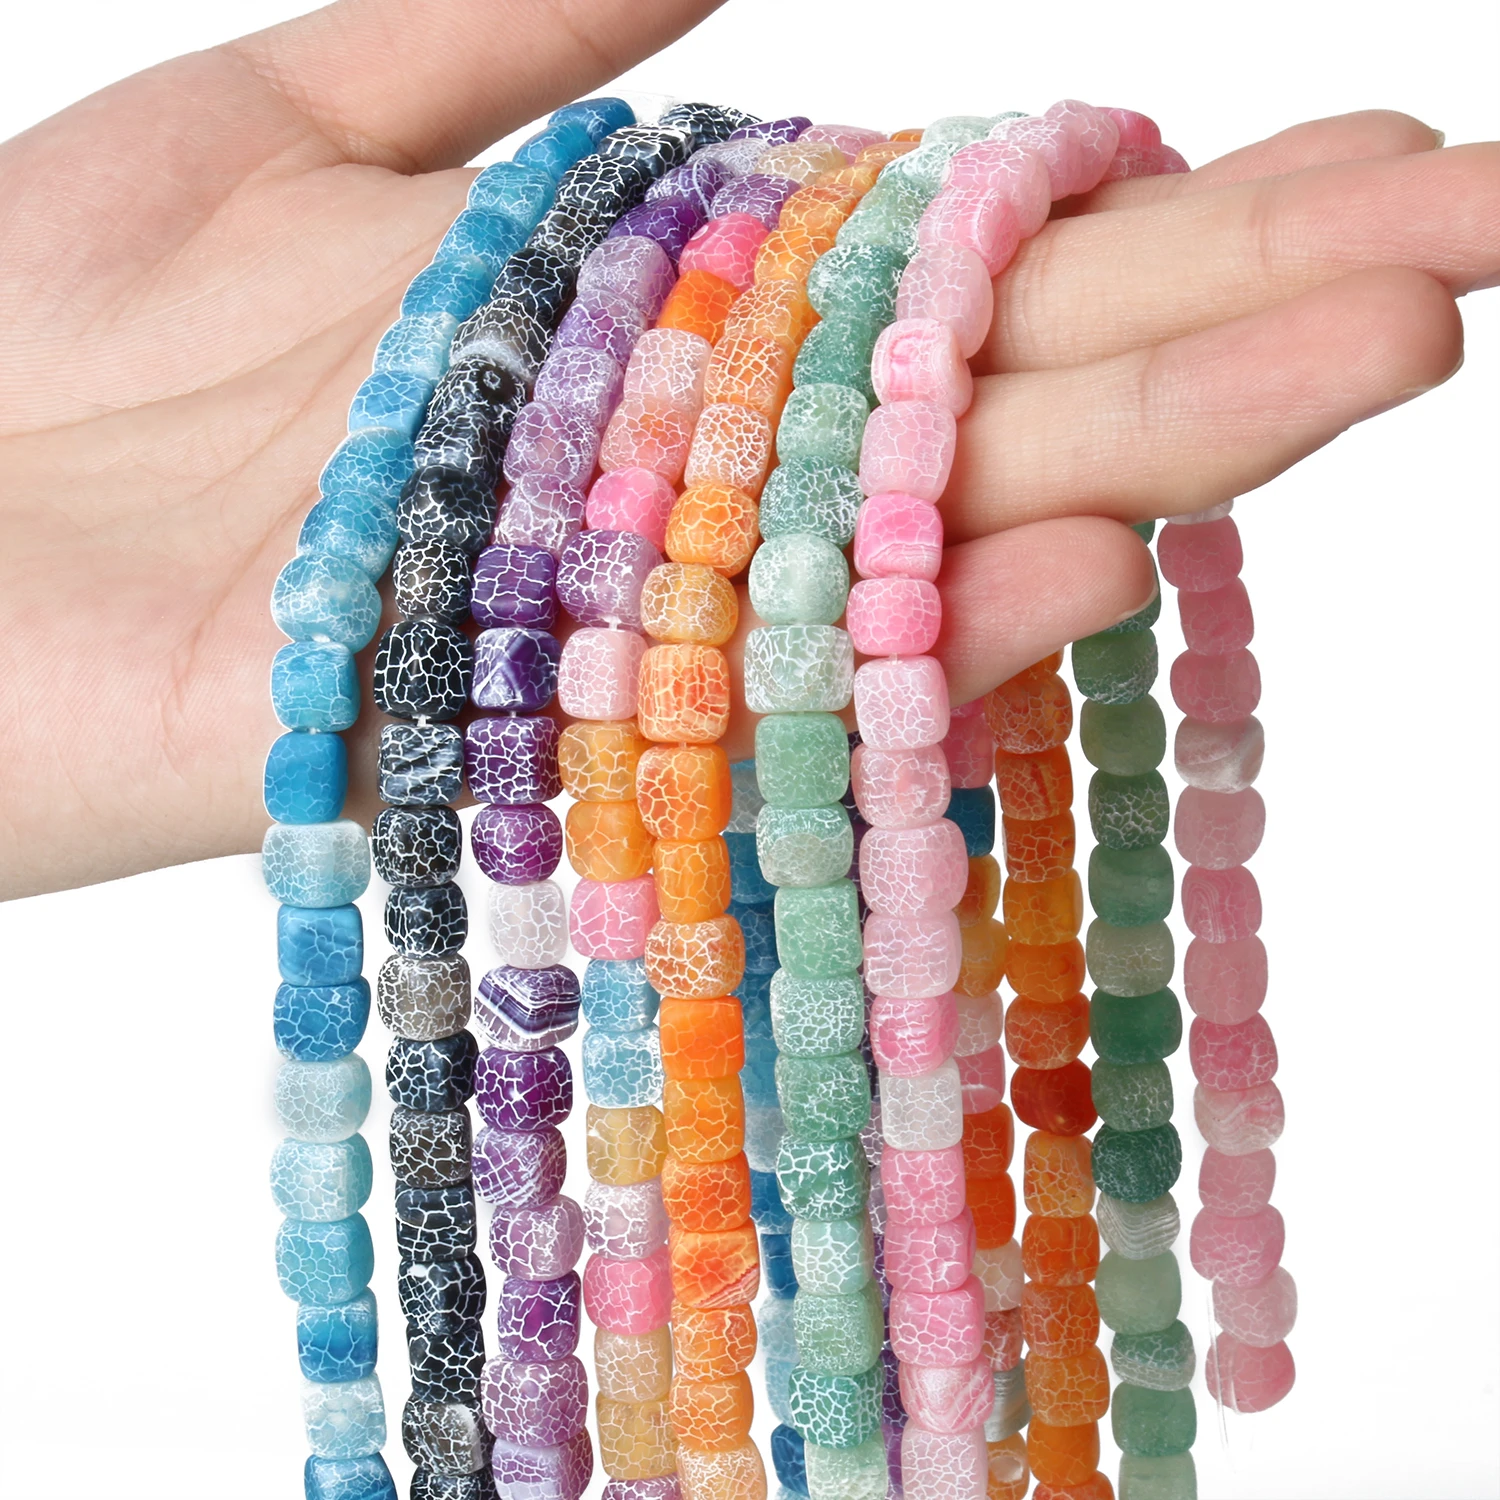 

Natural Stone Mixed color Frosted Cracked Square Agate Beads For Jewelry Making DIY Bracelet Necklace 8 mm 15 inches Wholesale